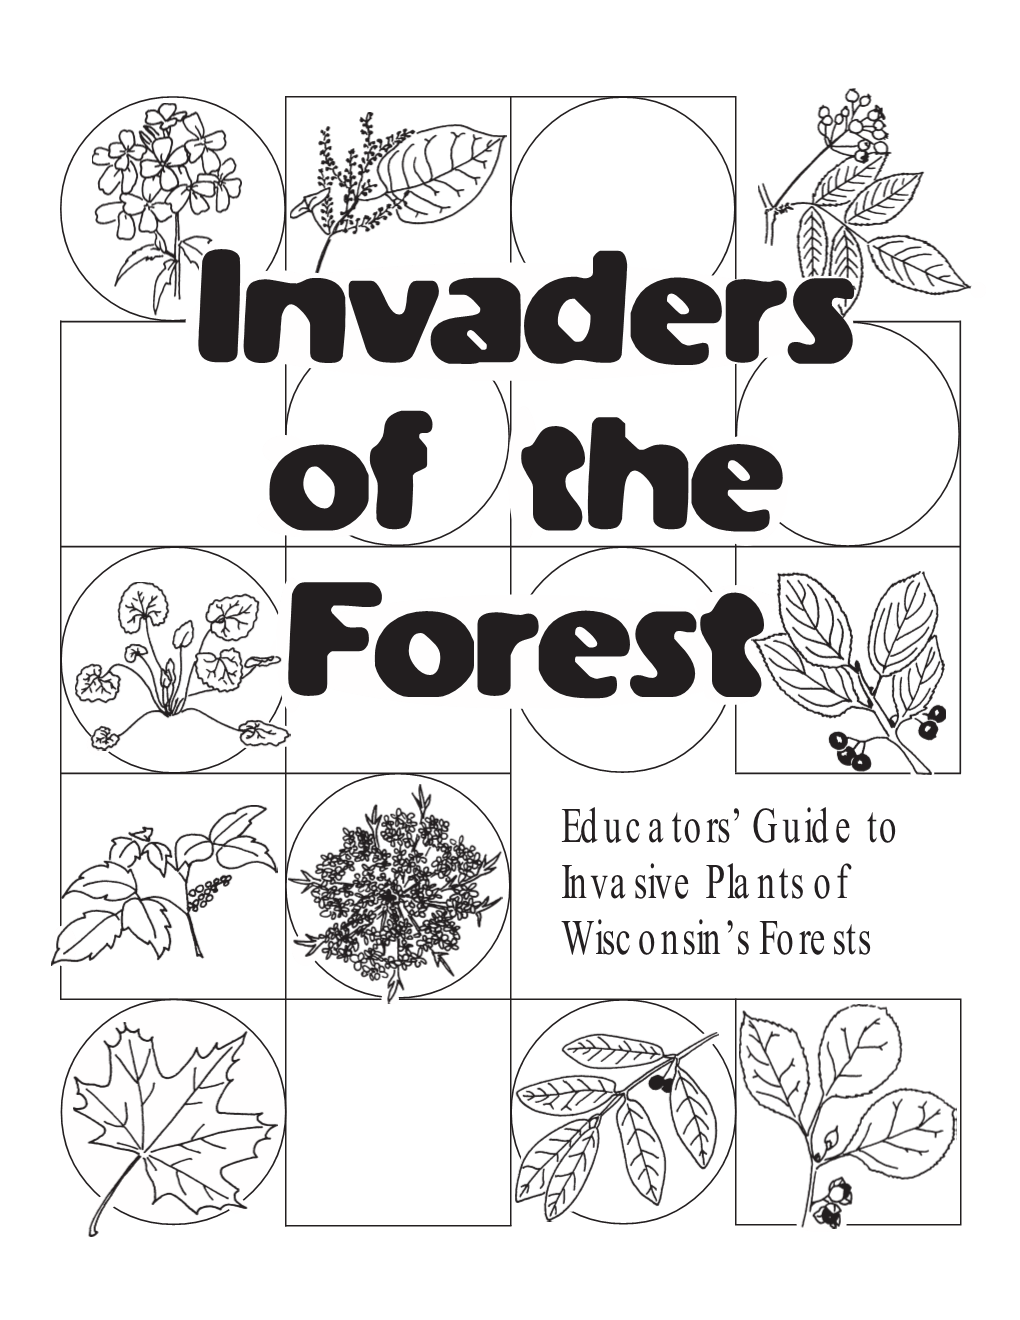 Invaders of the Forest Guide